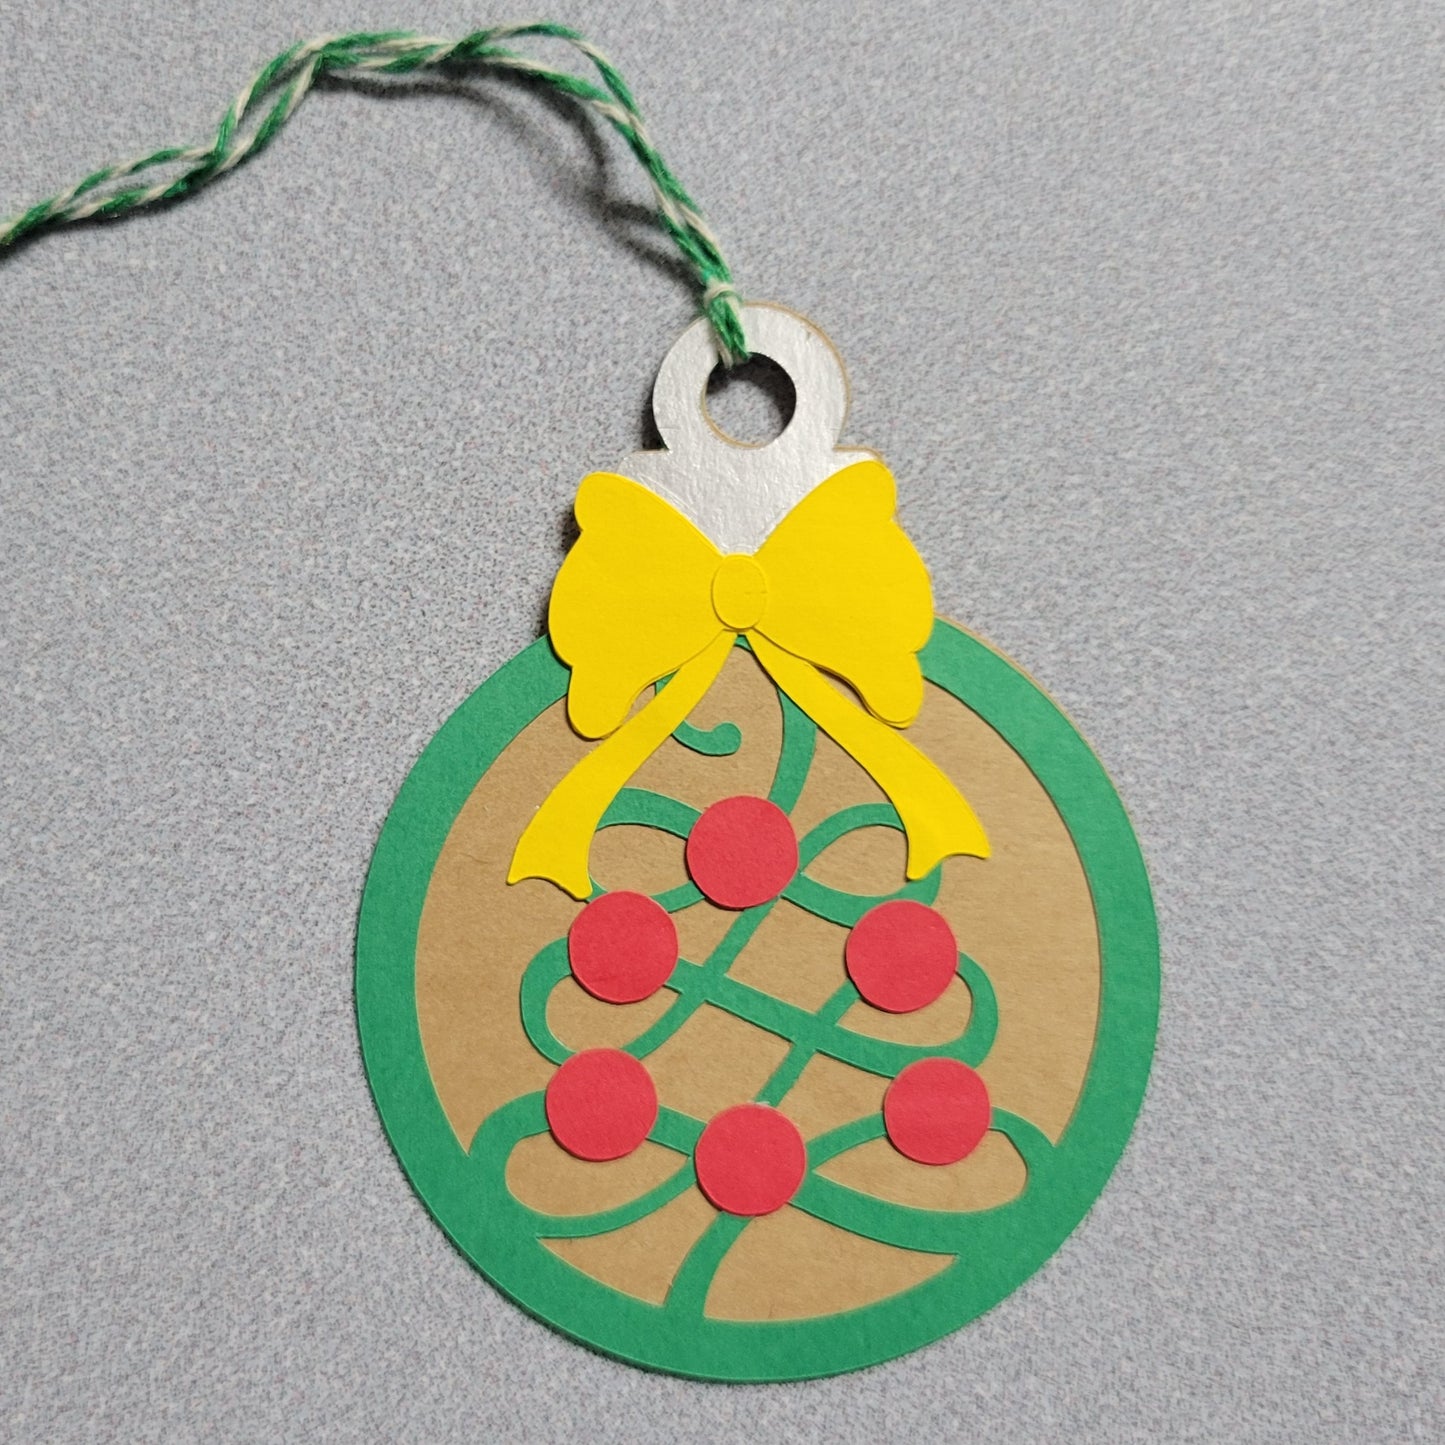 Green Tree Ornament Gift Tag.